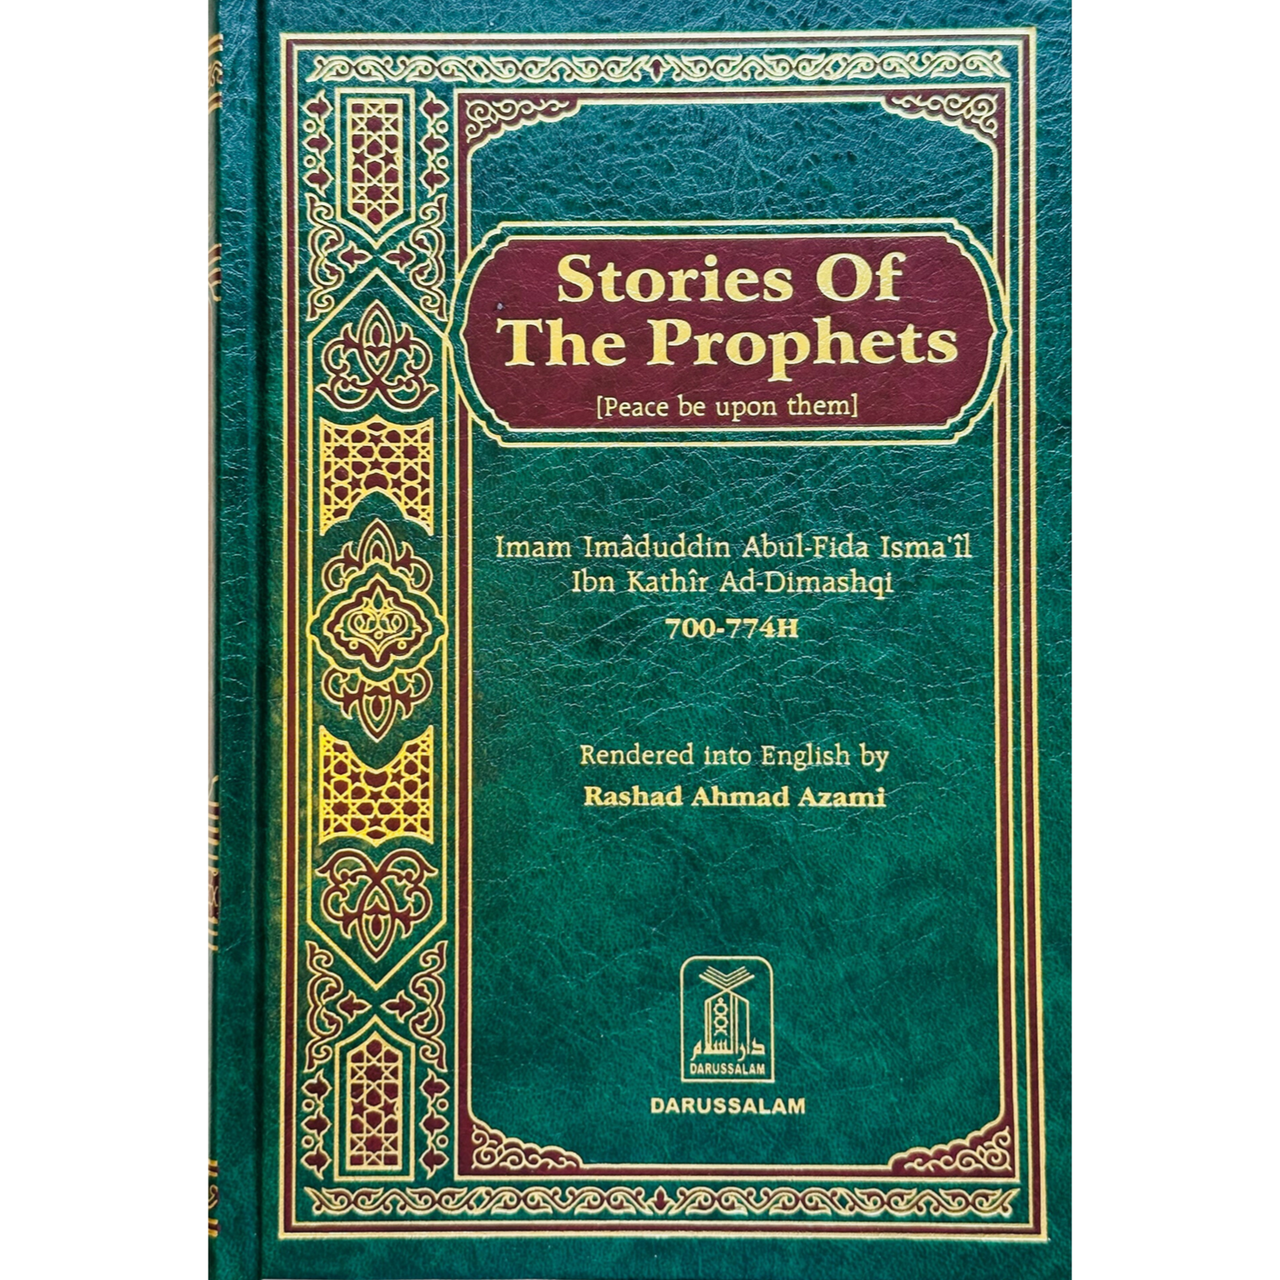 Stories of the Prophets from DARUSSALAM